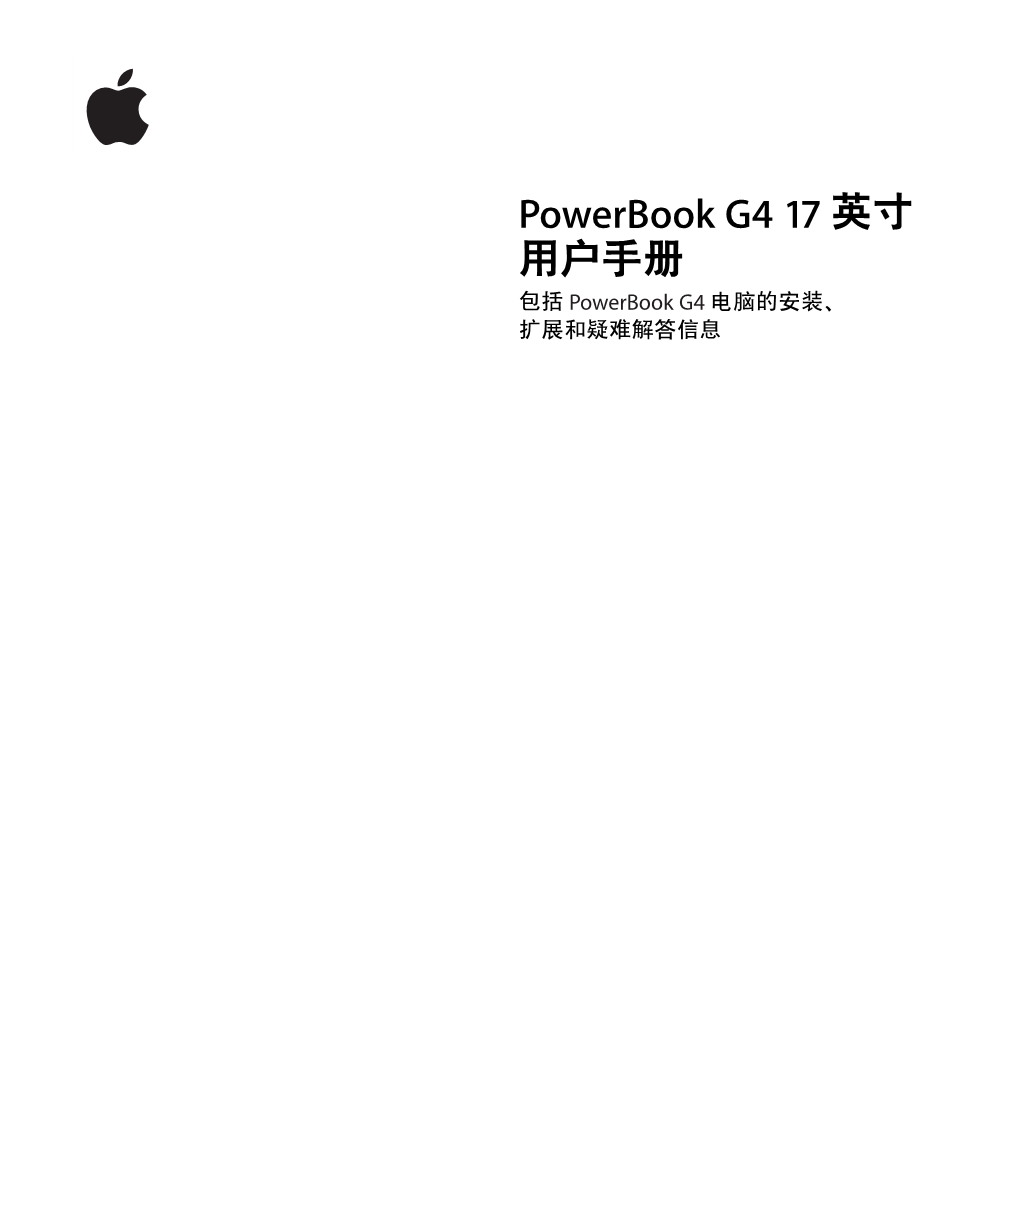 Powerbook G4 17-Inch (1.67Ghz) User's Guide (Manual)